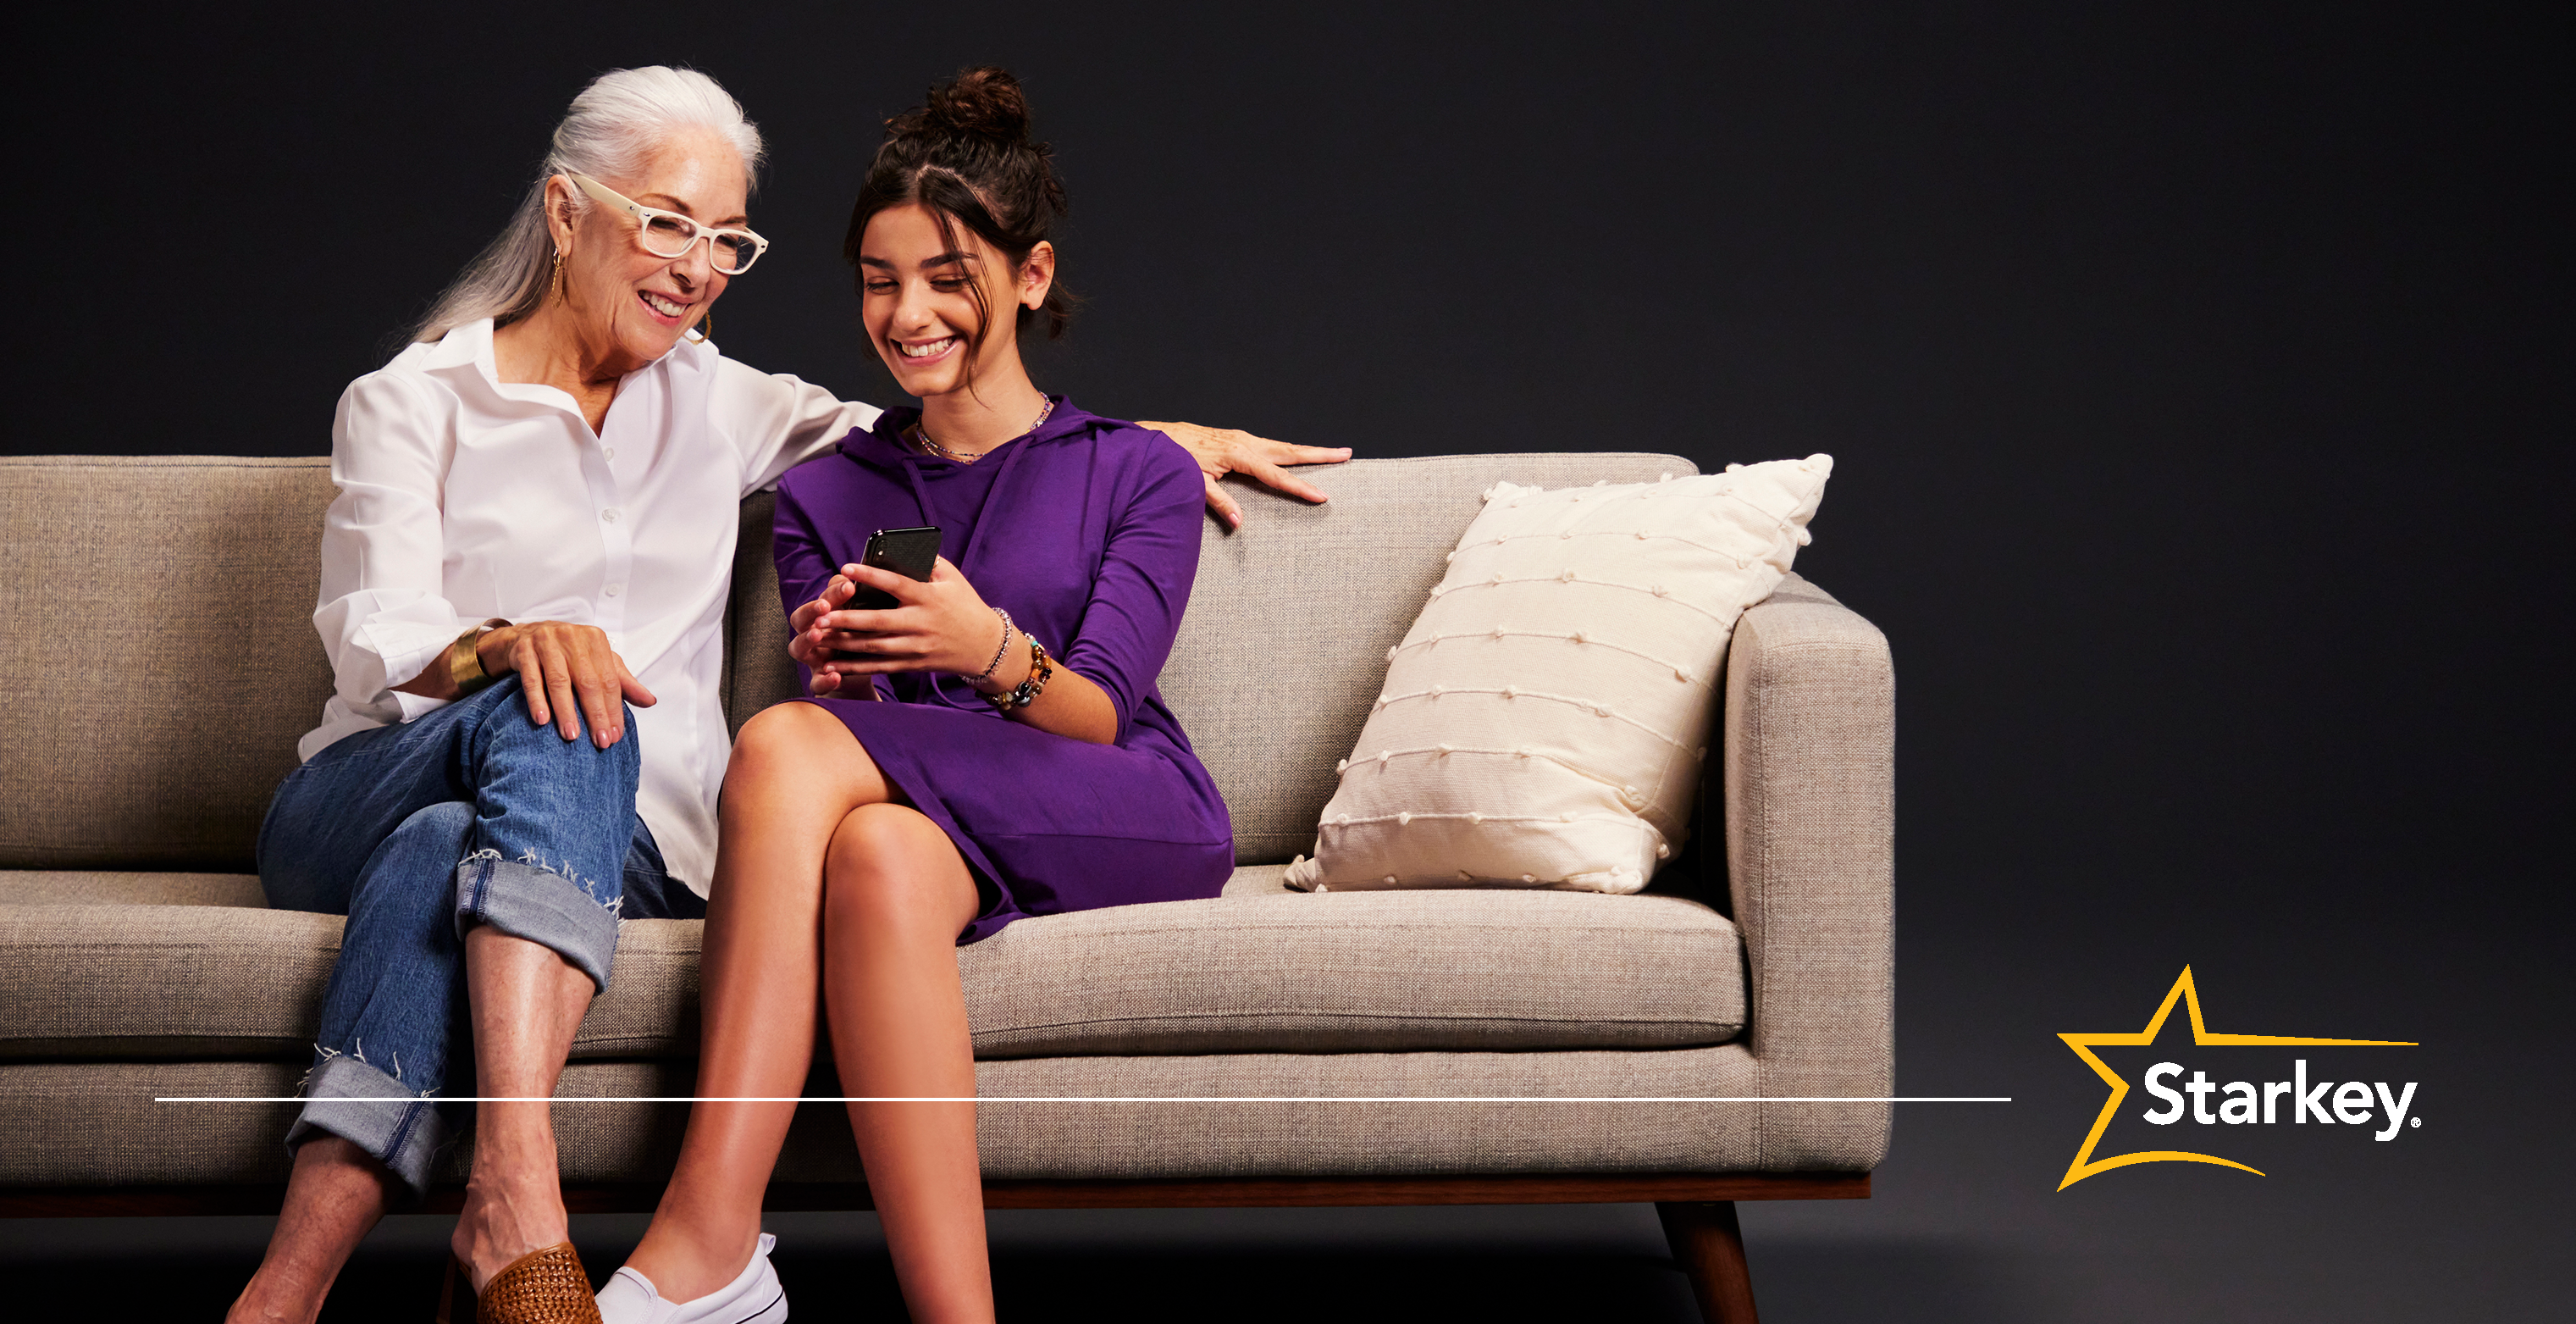 Senior woman sitting on a couch with her arm around young woman looking at a phone